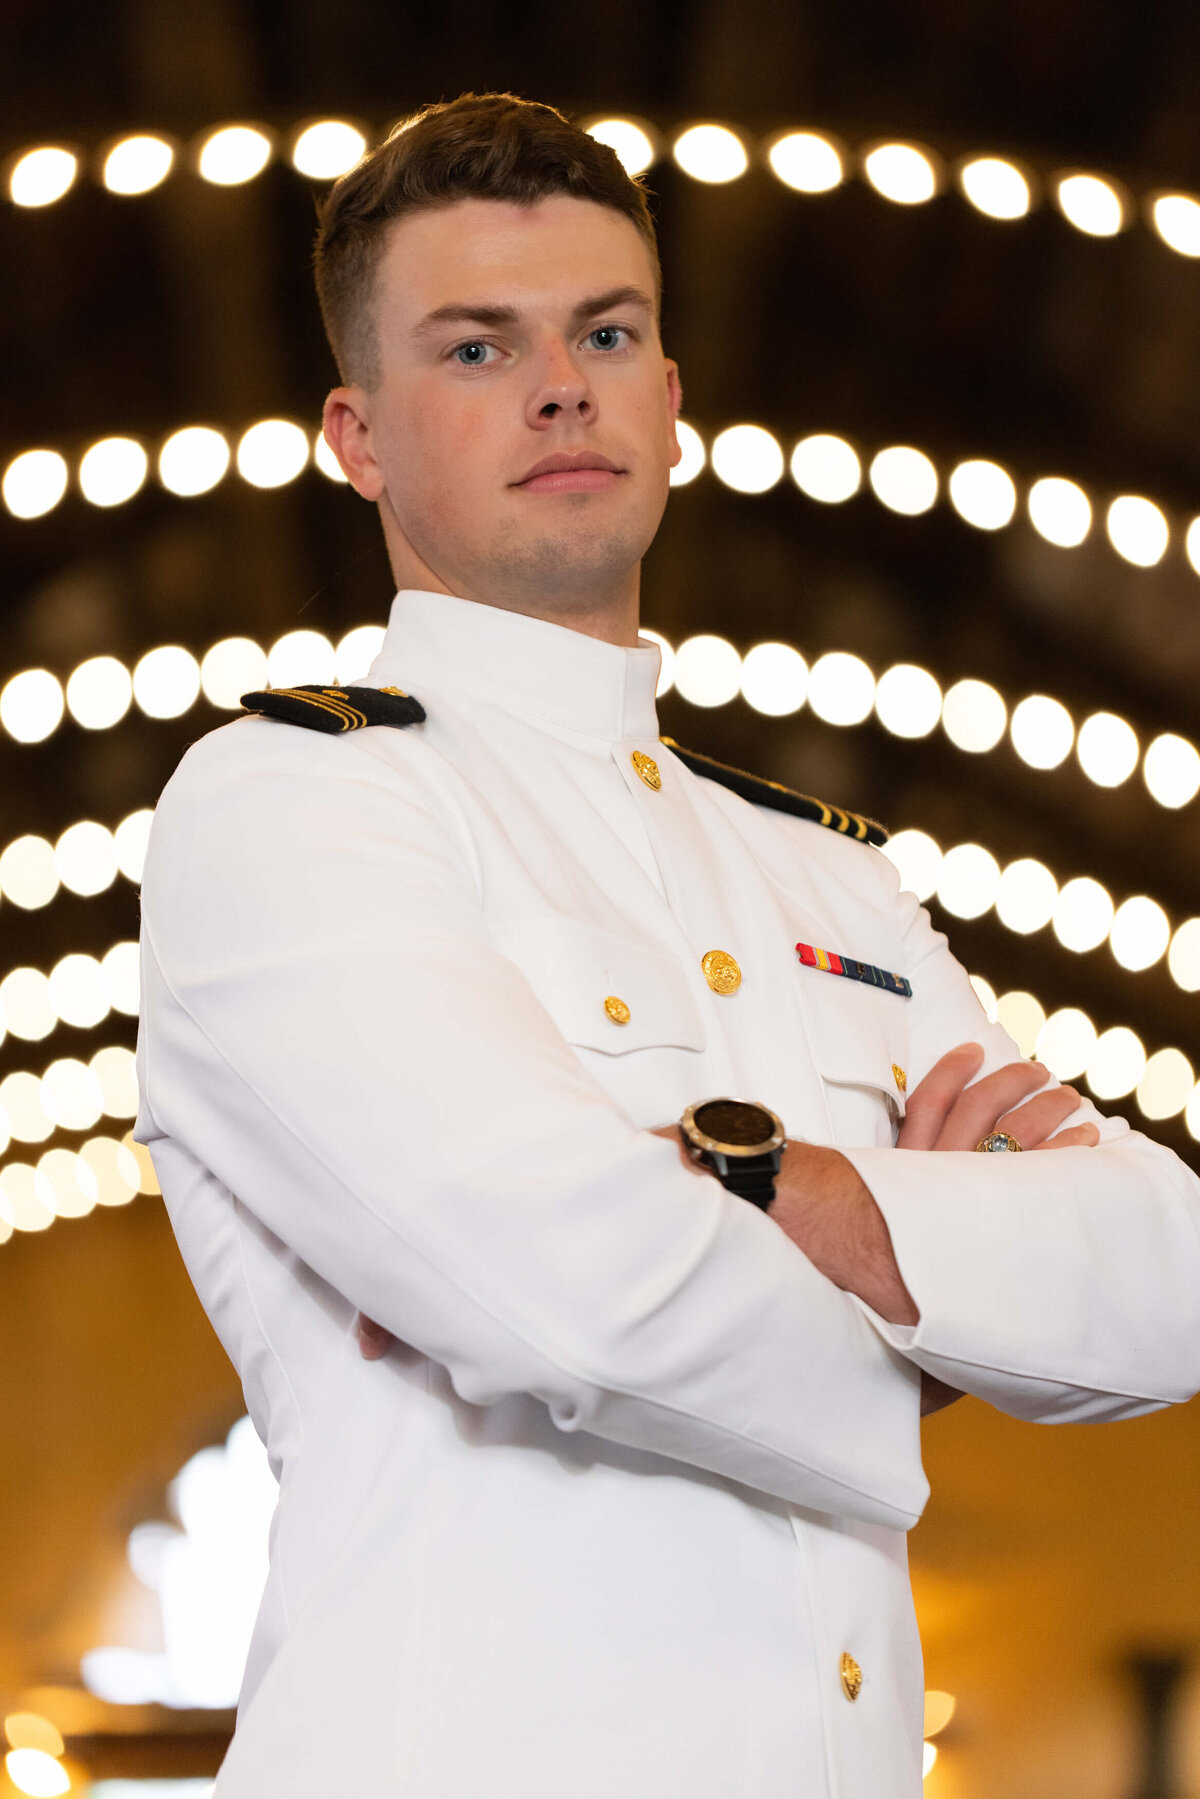 US Navy Officer in Dhalgren Hall lights in white uniform for senior photography in Annapolis, Maryland.